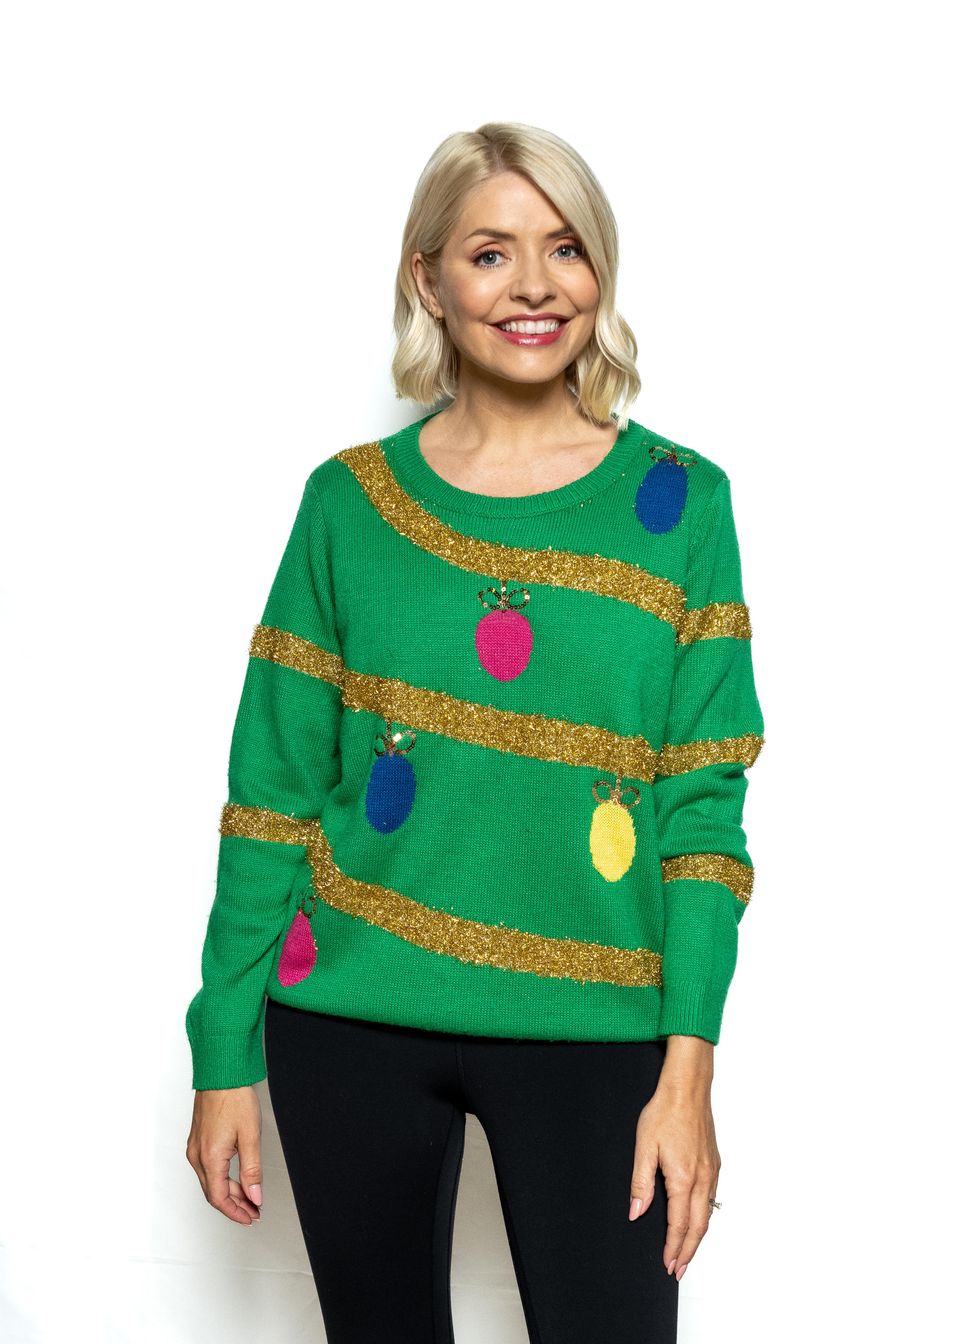 Holly Willoughby among celebs donning second-hand wear for Christmas Jumper Day